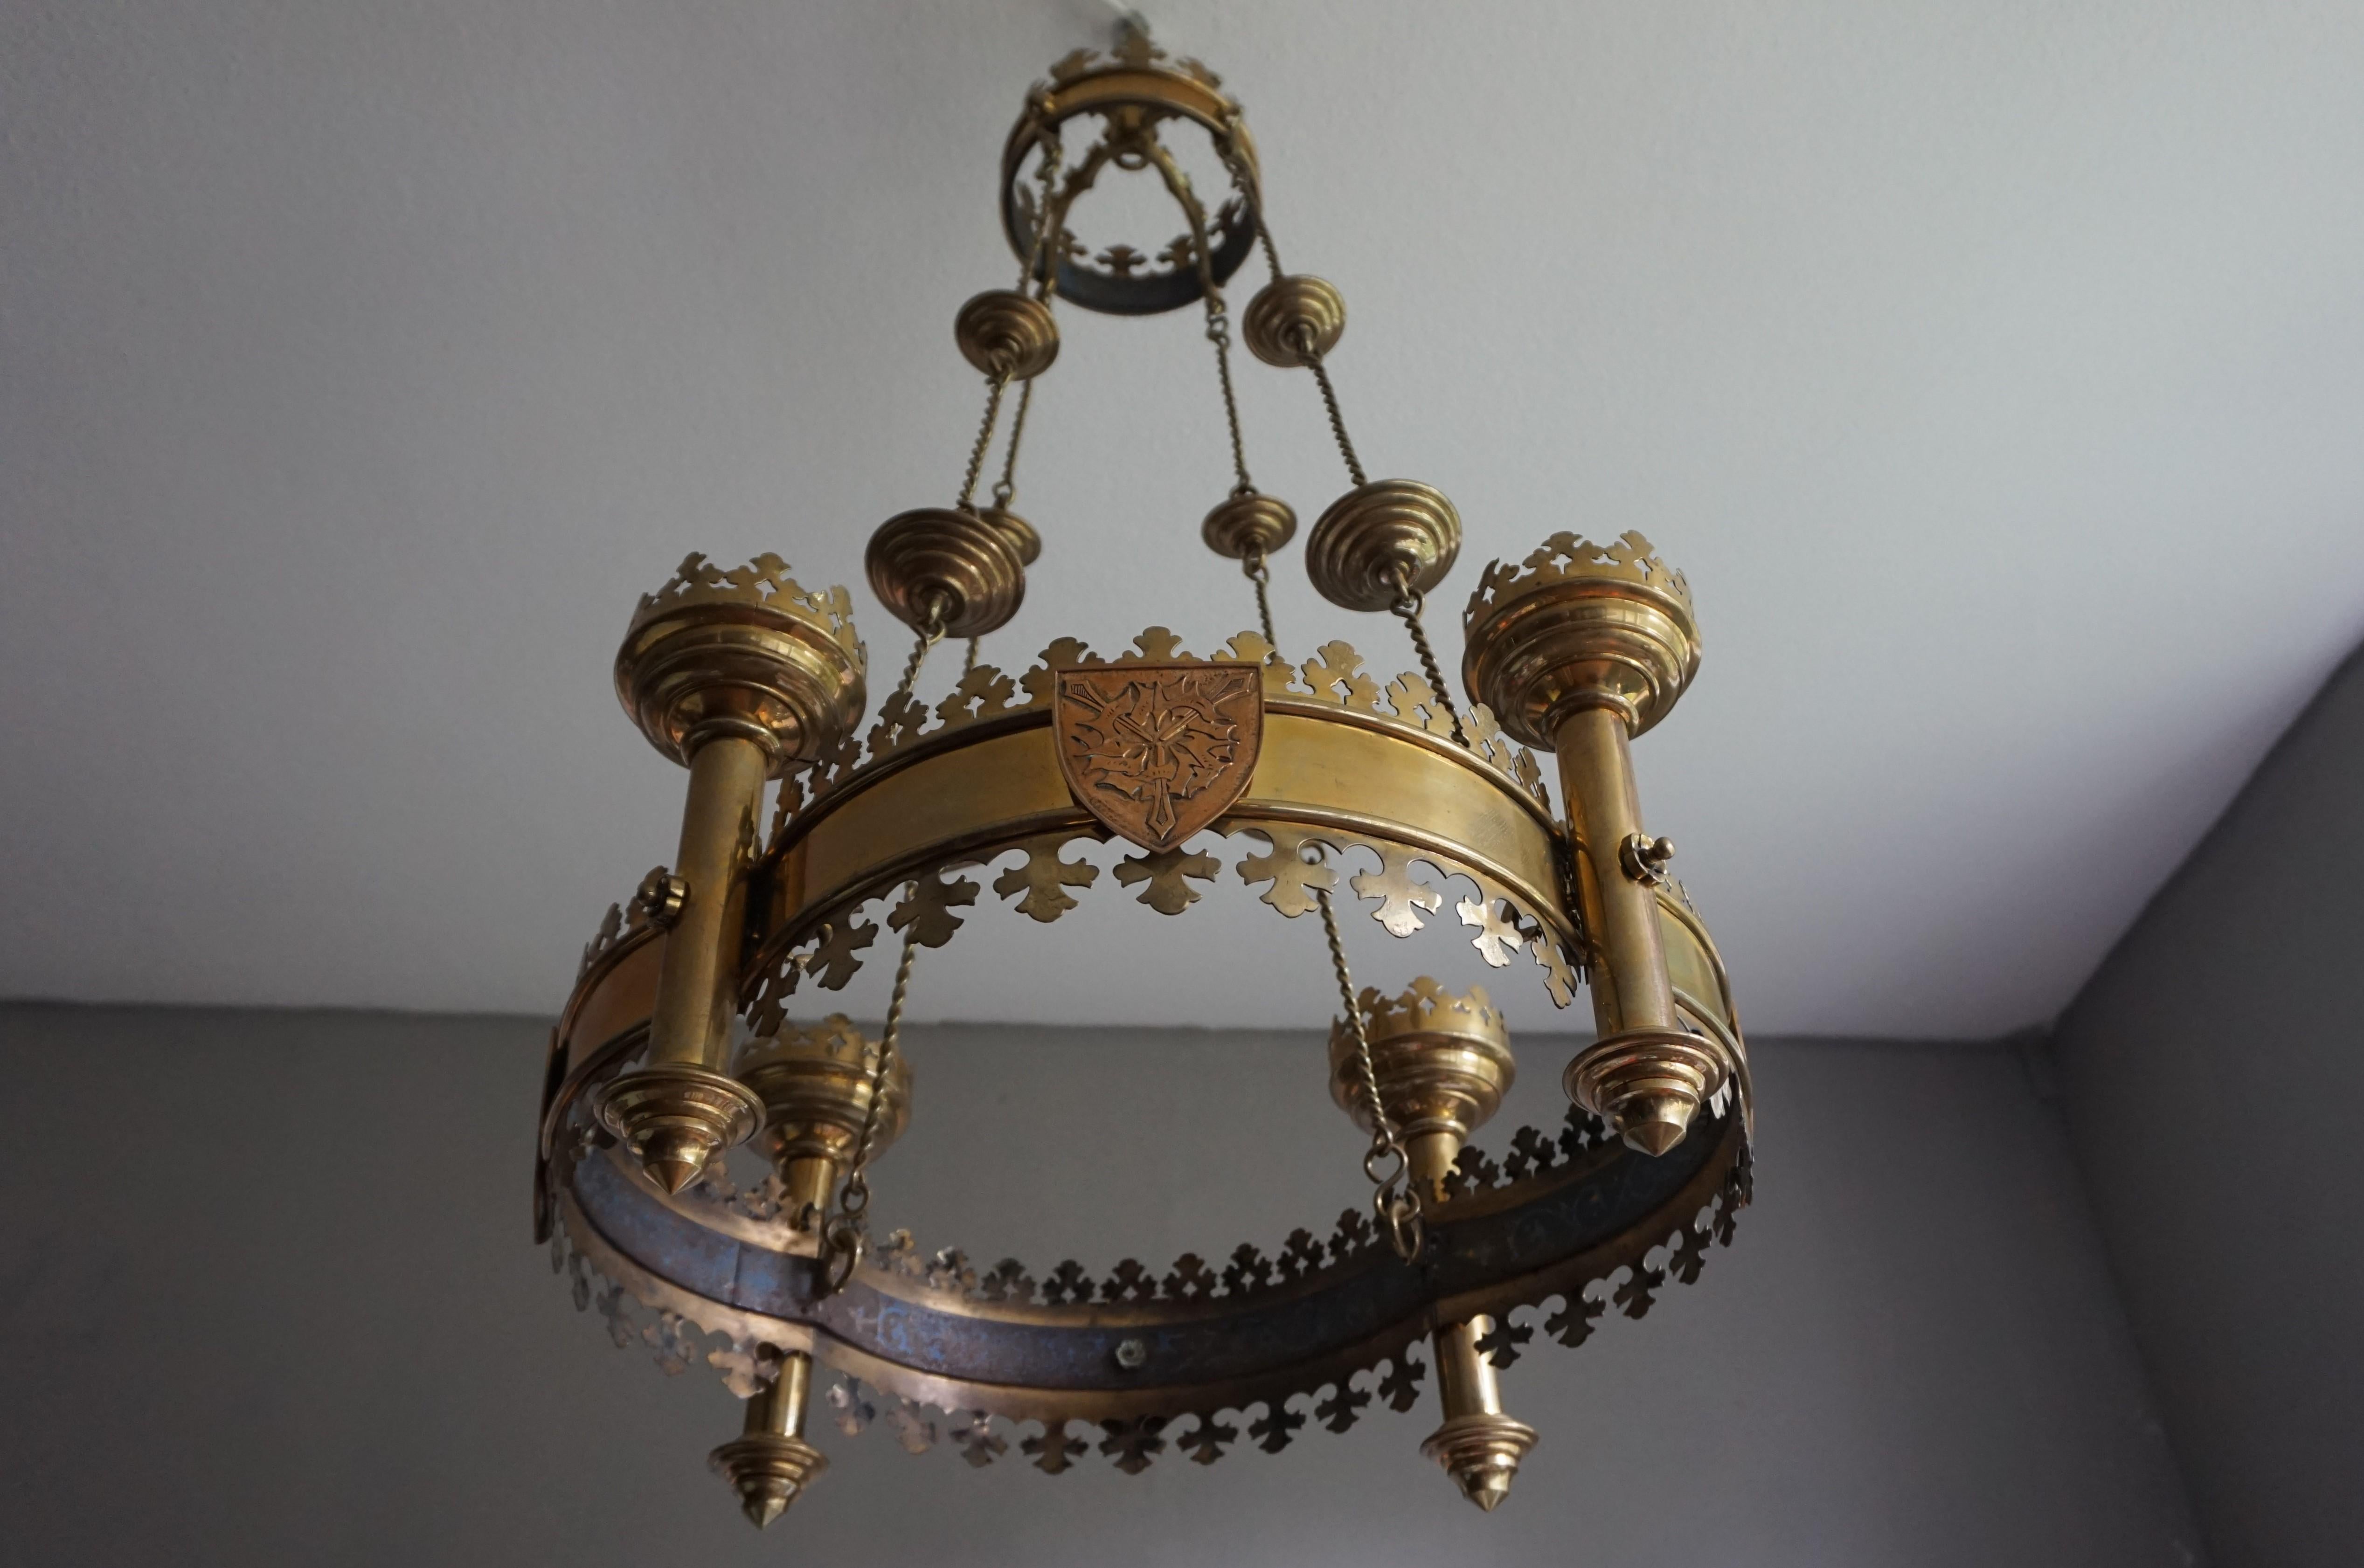 Beautiful and meaningful church relic from the late 1800s.

This stunning and all handcrafted candle chandelier from the 1880s is designed in the shape of an advent wreath. When we first saw this work of religious art last week, we directly searched